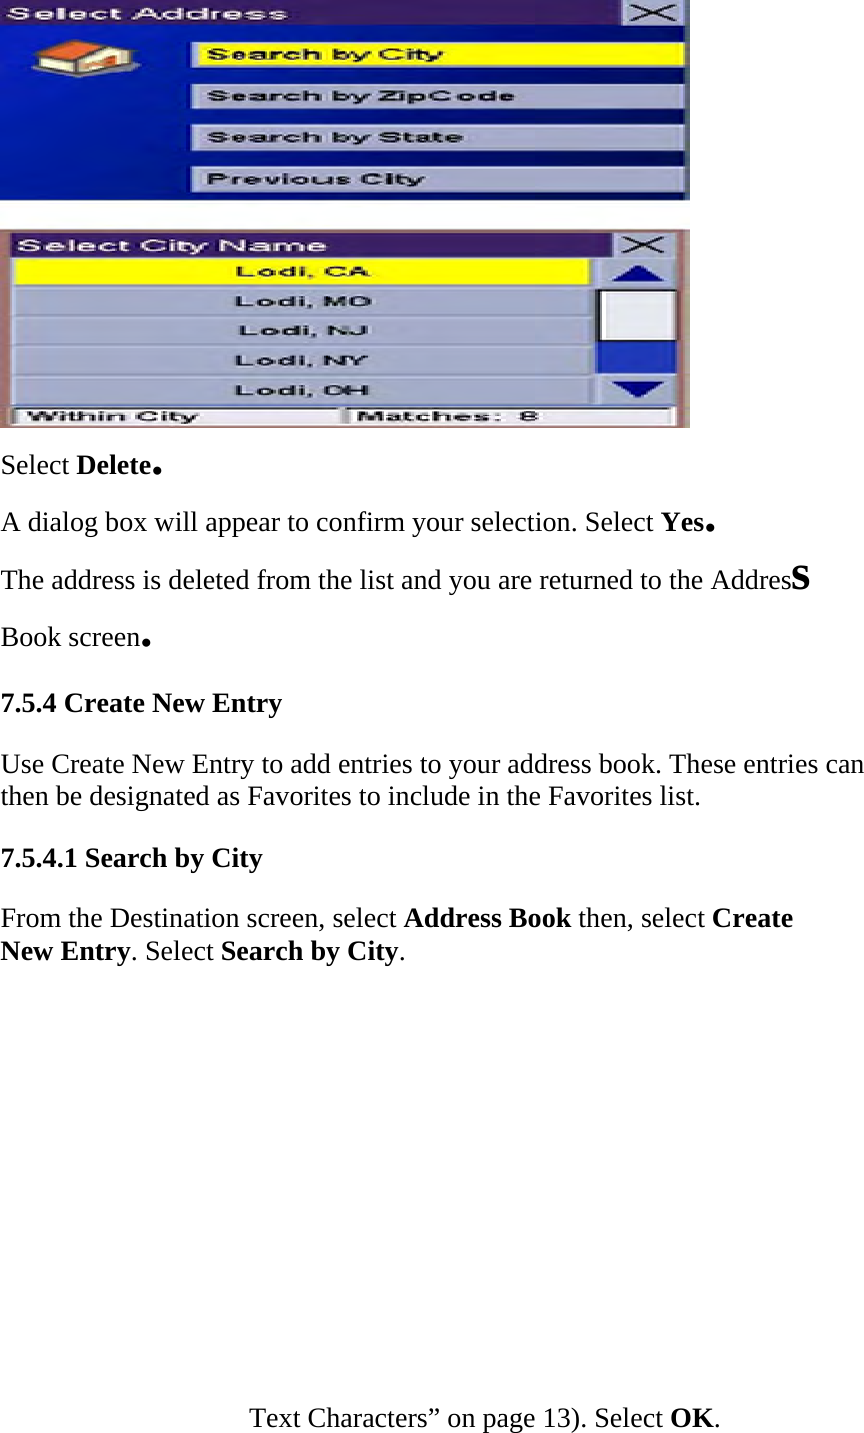  Select Delete.  A dialog box will appear to confirm your selection. Select Yes.  The address is deleted from the list and you are returned to the Address  Book screen.  7.5.4 Create New Entry  Use Create New Entry to add entries to your address book. These entries can then be designated as Favorites to include in the Favorites list.  7.5.4.1 Search by City  From the Destination screen, select Address Book then, select Create New Entry. Select Search by City.  Text Characters” on page 13). Select OK.  